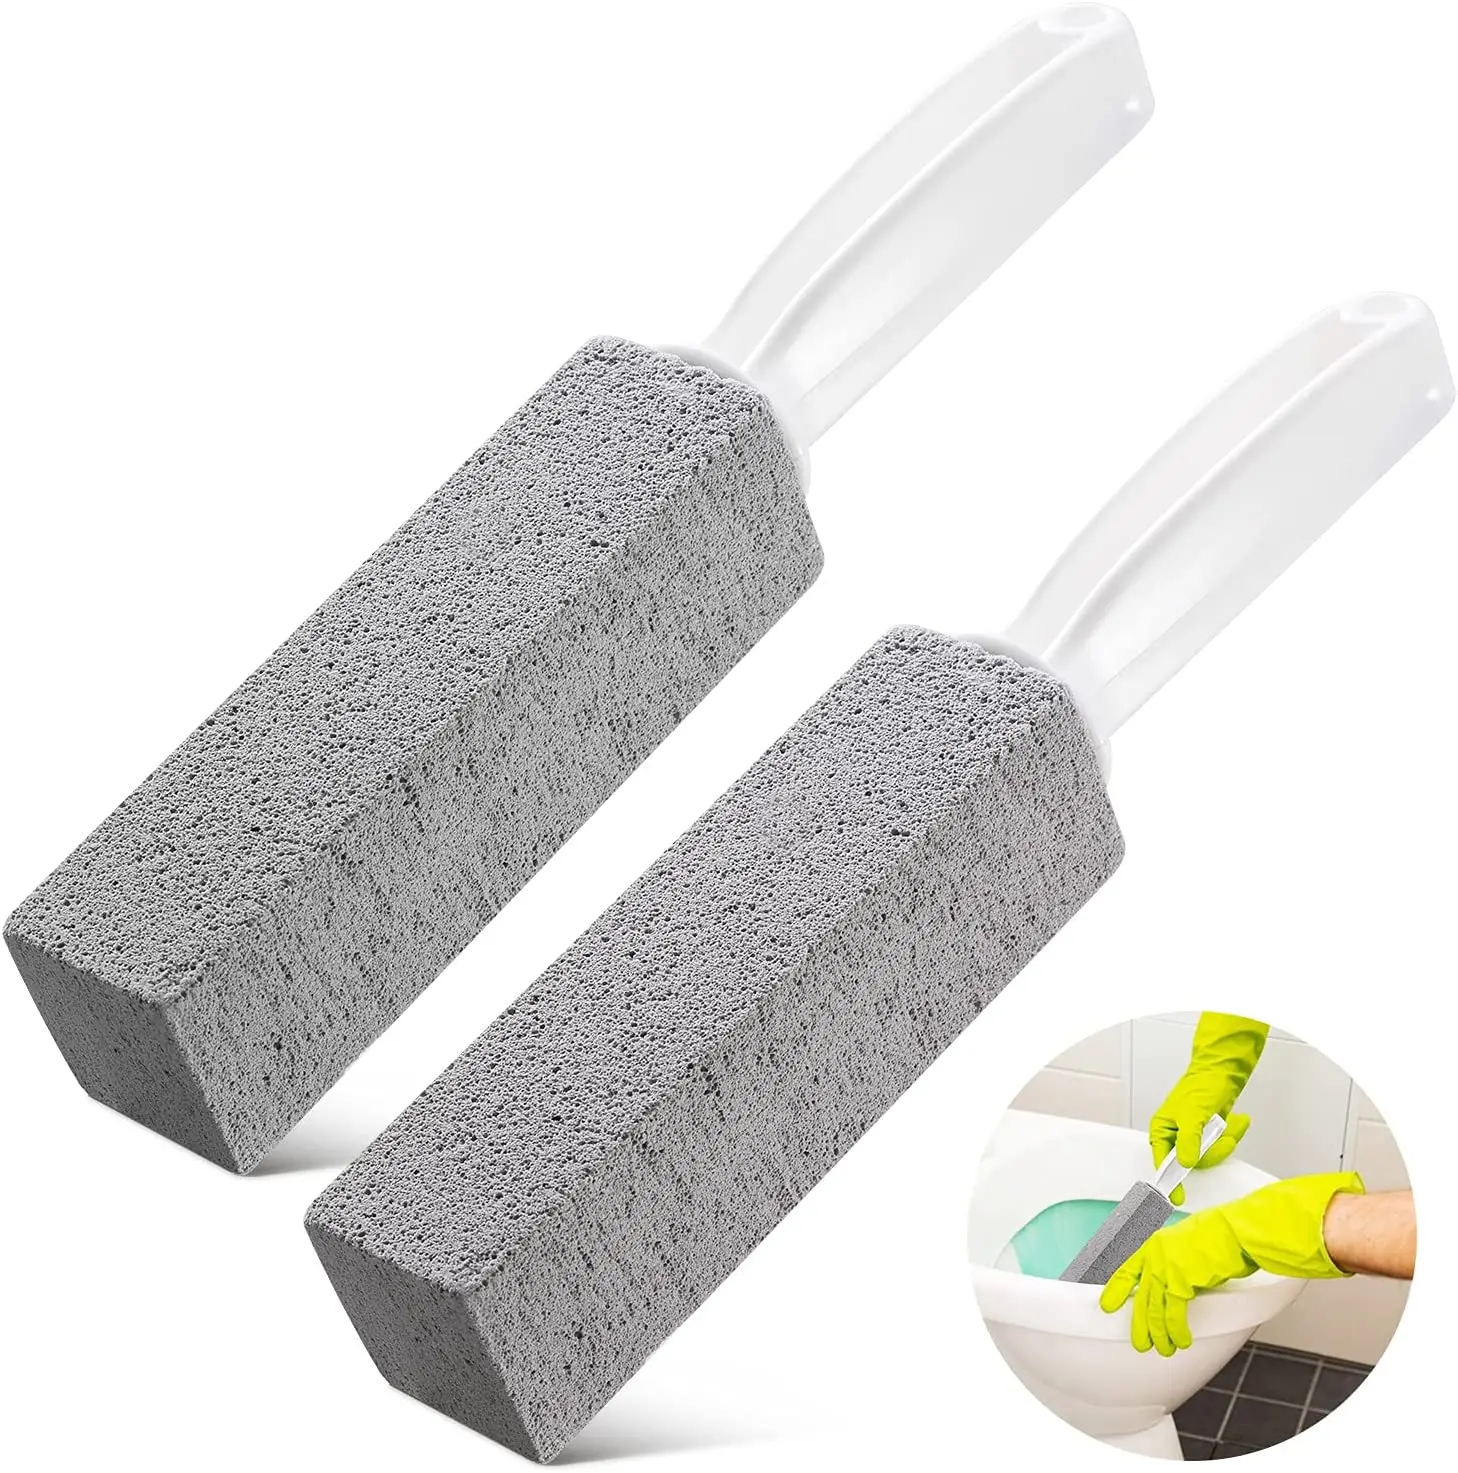 

Pumice Stone Toilet Bowl Cleaner with Extra Long Handle Pumice Stone for Grill Griddle, Remove Limescale, Hard Water Rings